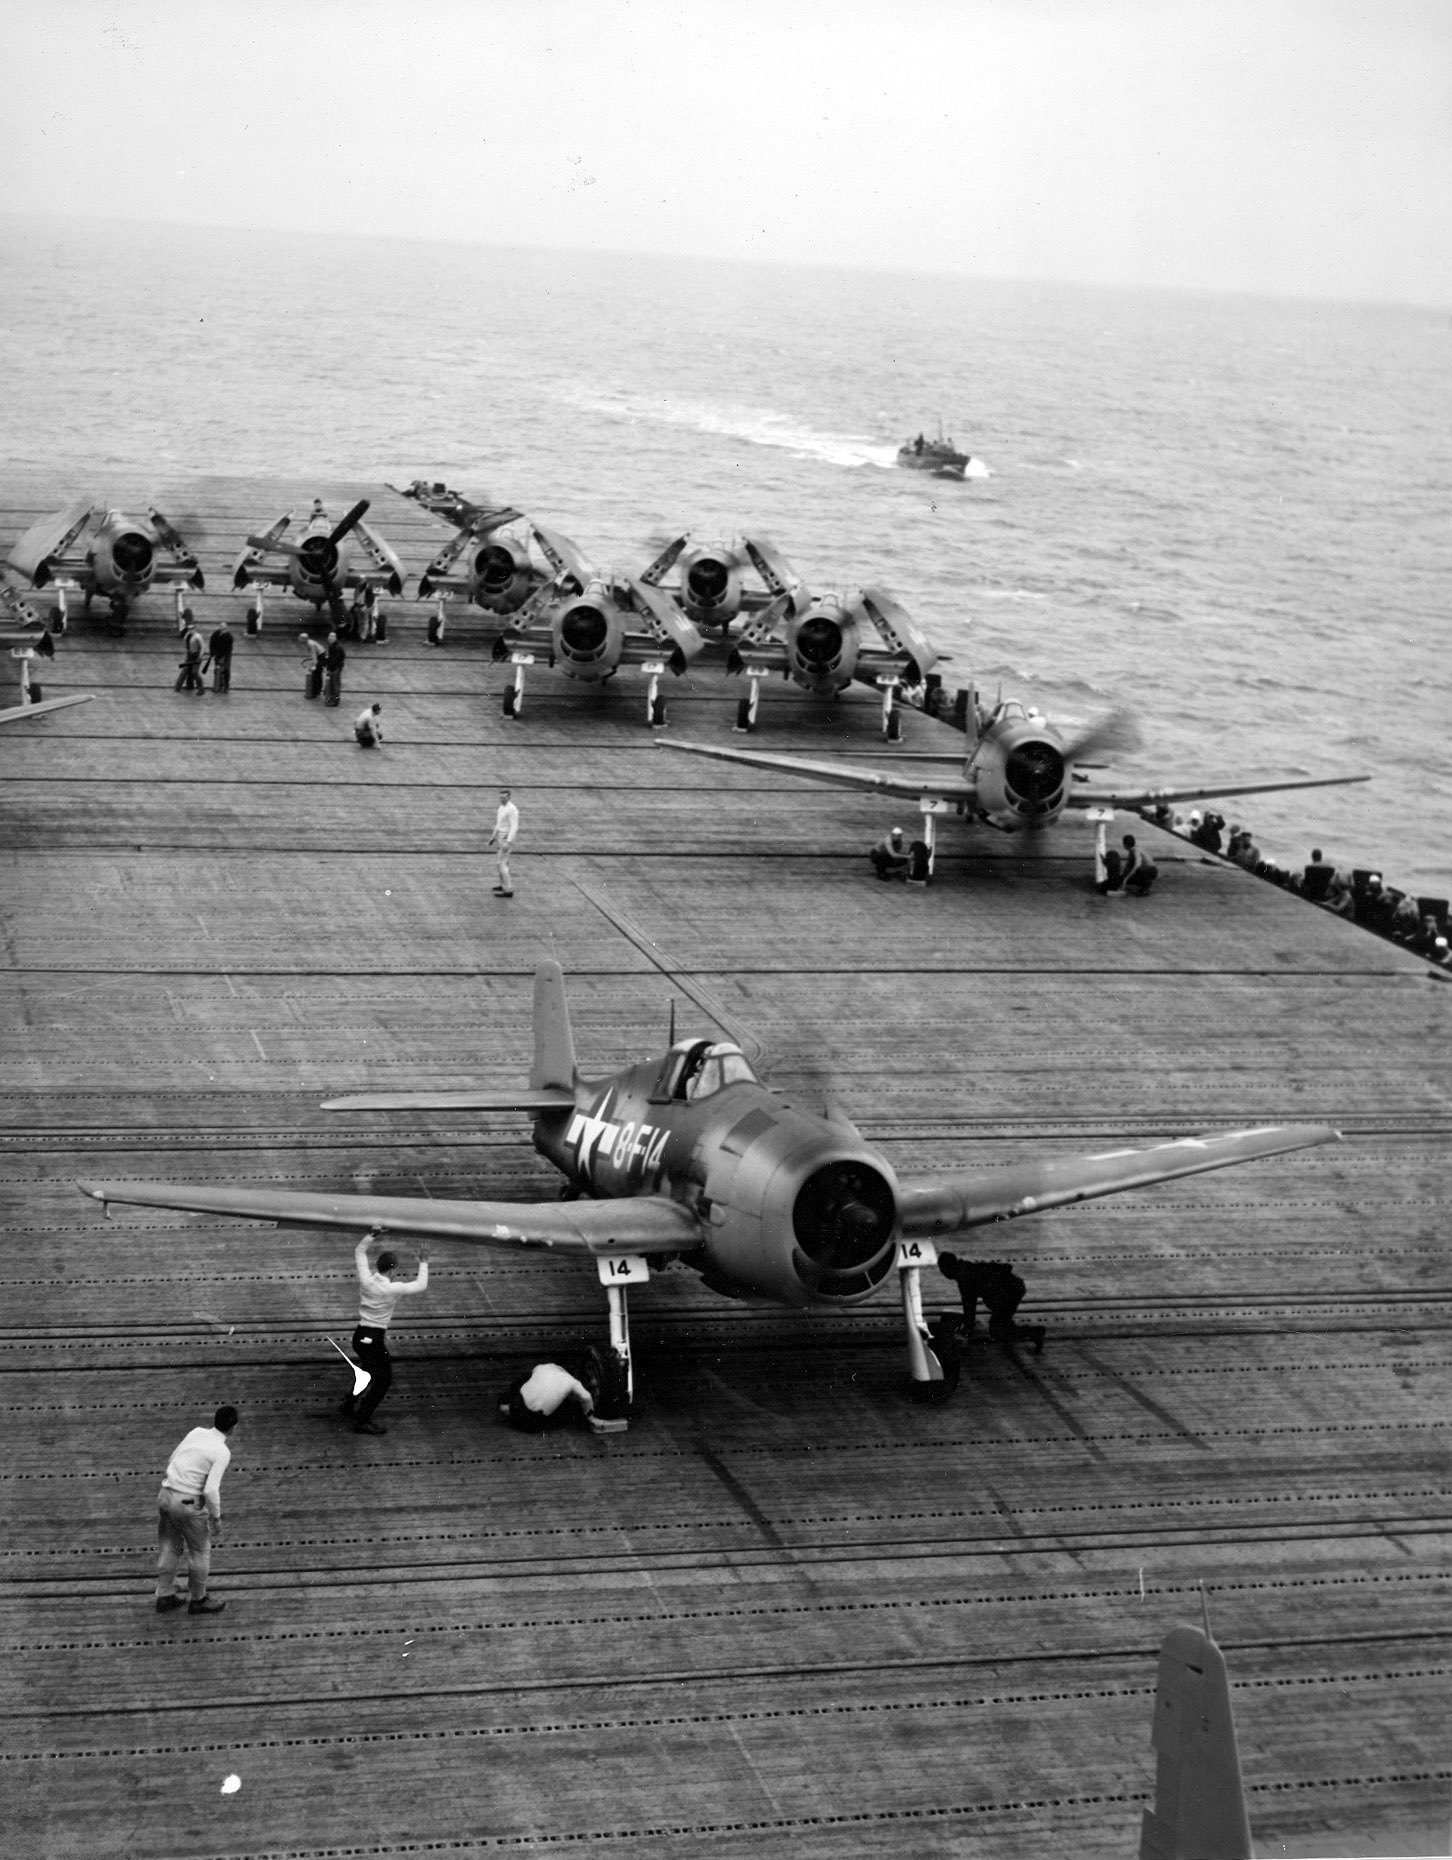 F6F Hellcat aircraft of Fighting Squadron 8 warm up on USS Intrepid's flight deck, 1943, photo 1 of 2; probably during stateside shakedown training